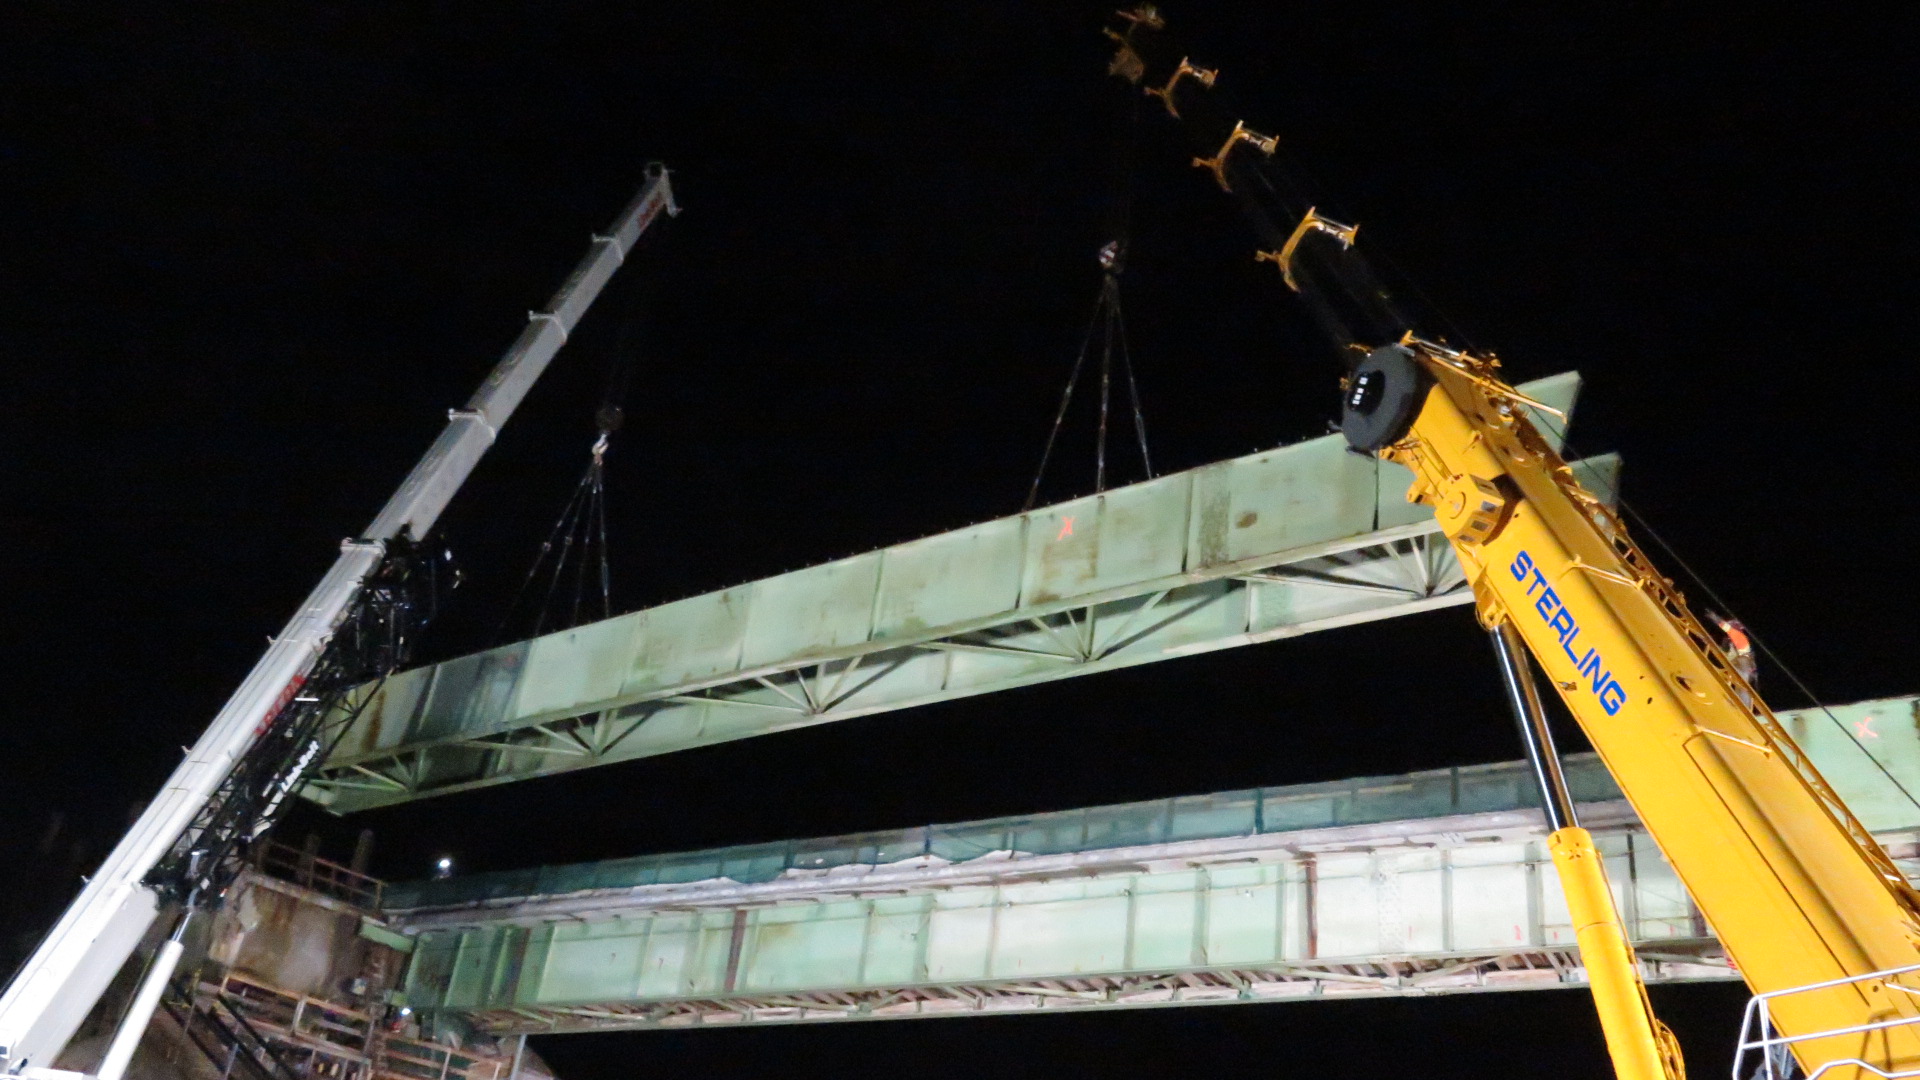 160 and 200 ton crane lowering the approach girder